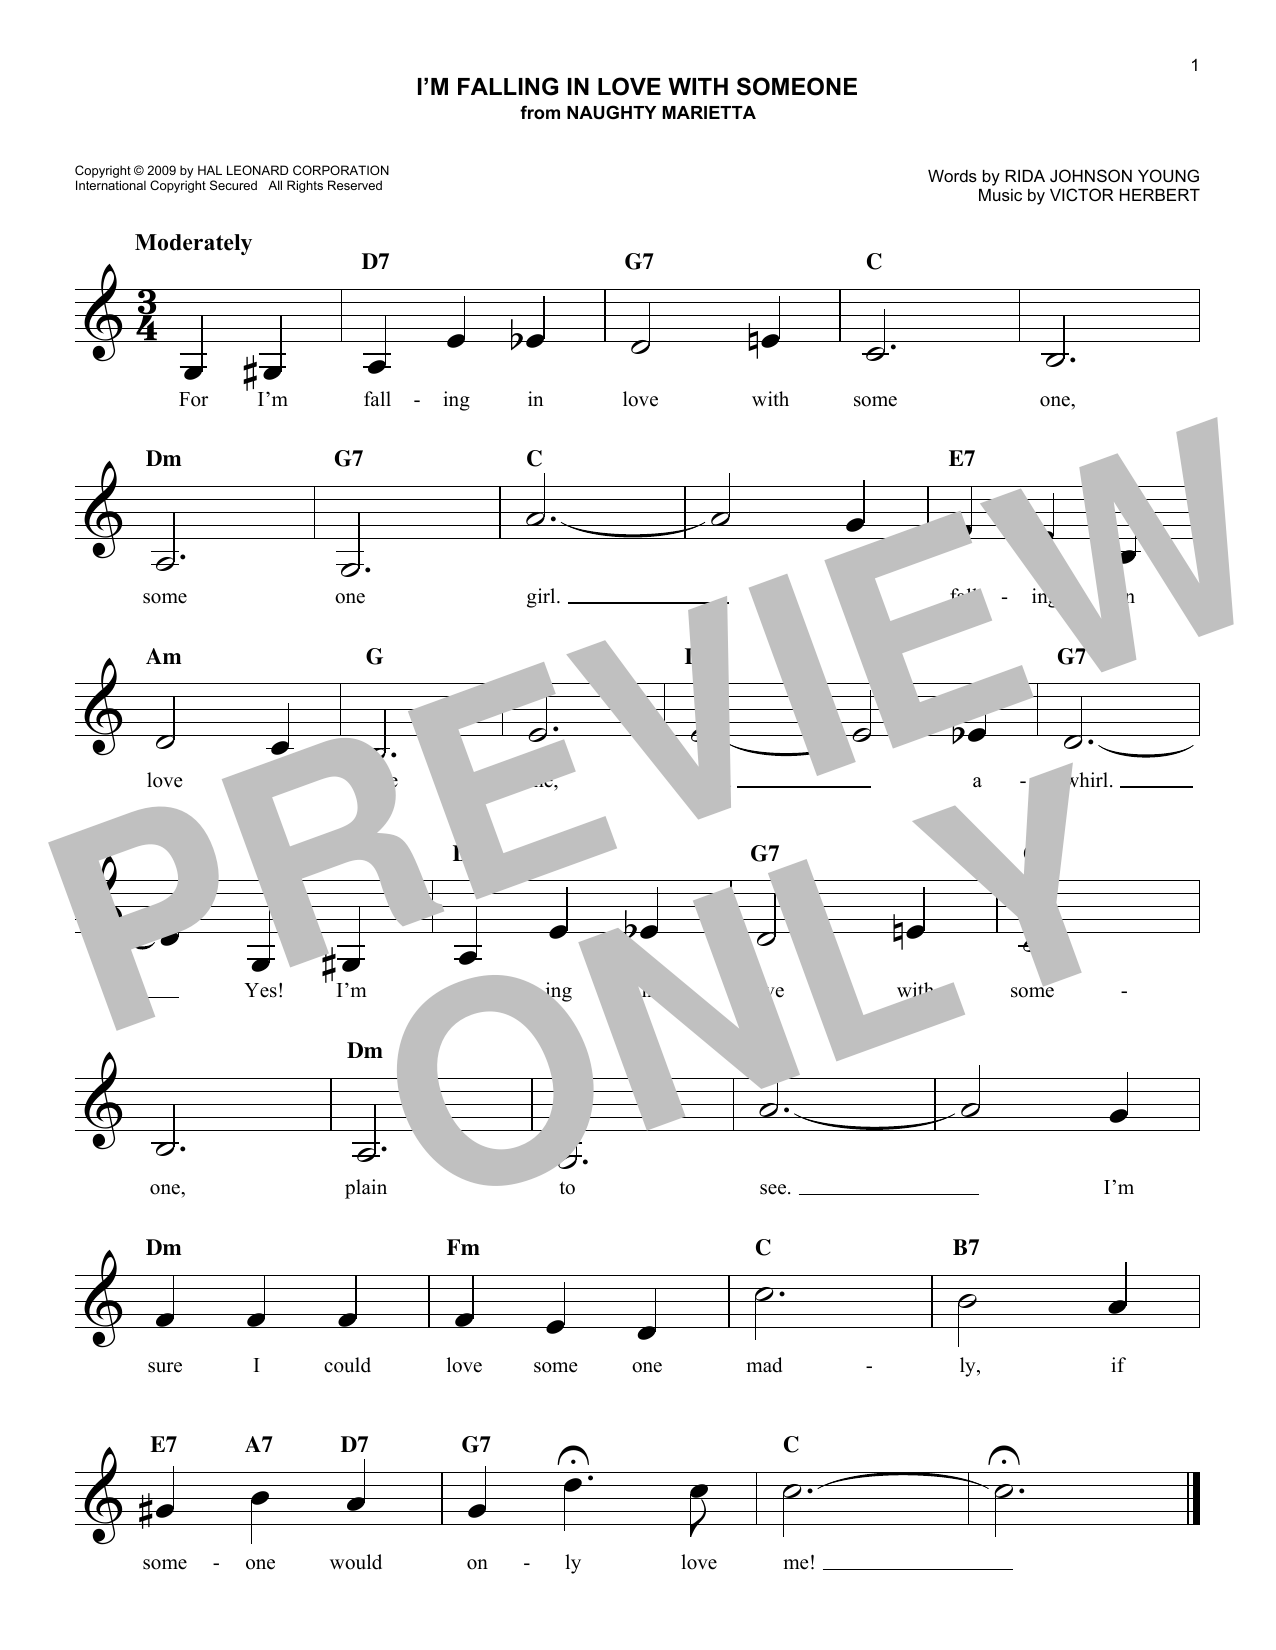 Download Rida Johnson Young I'm Falling In Love With Someone Sheet Music